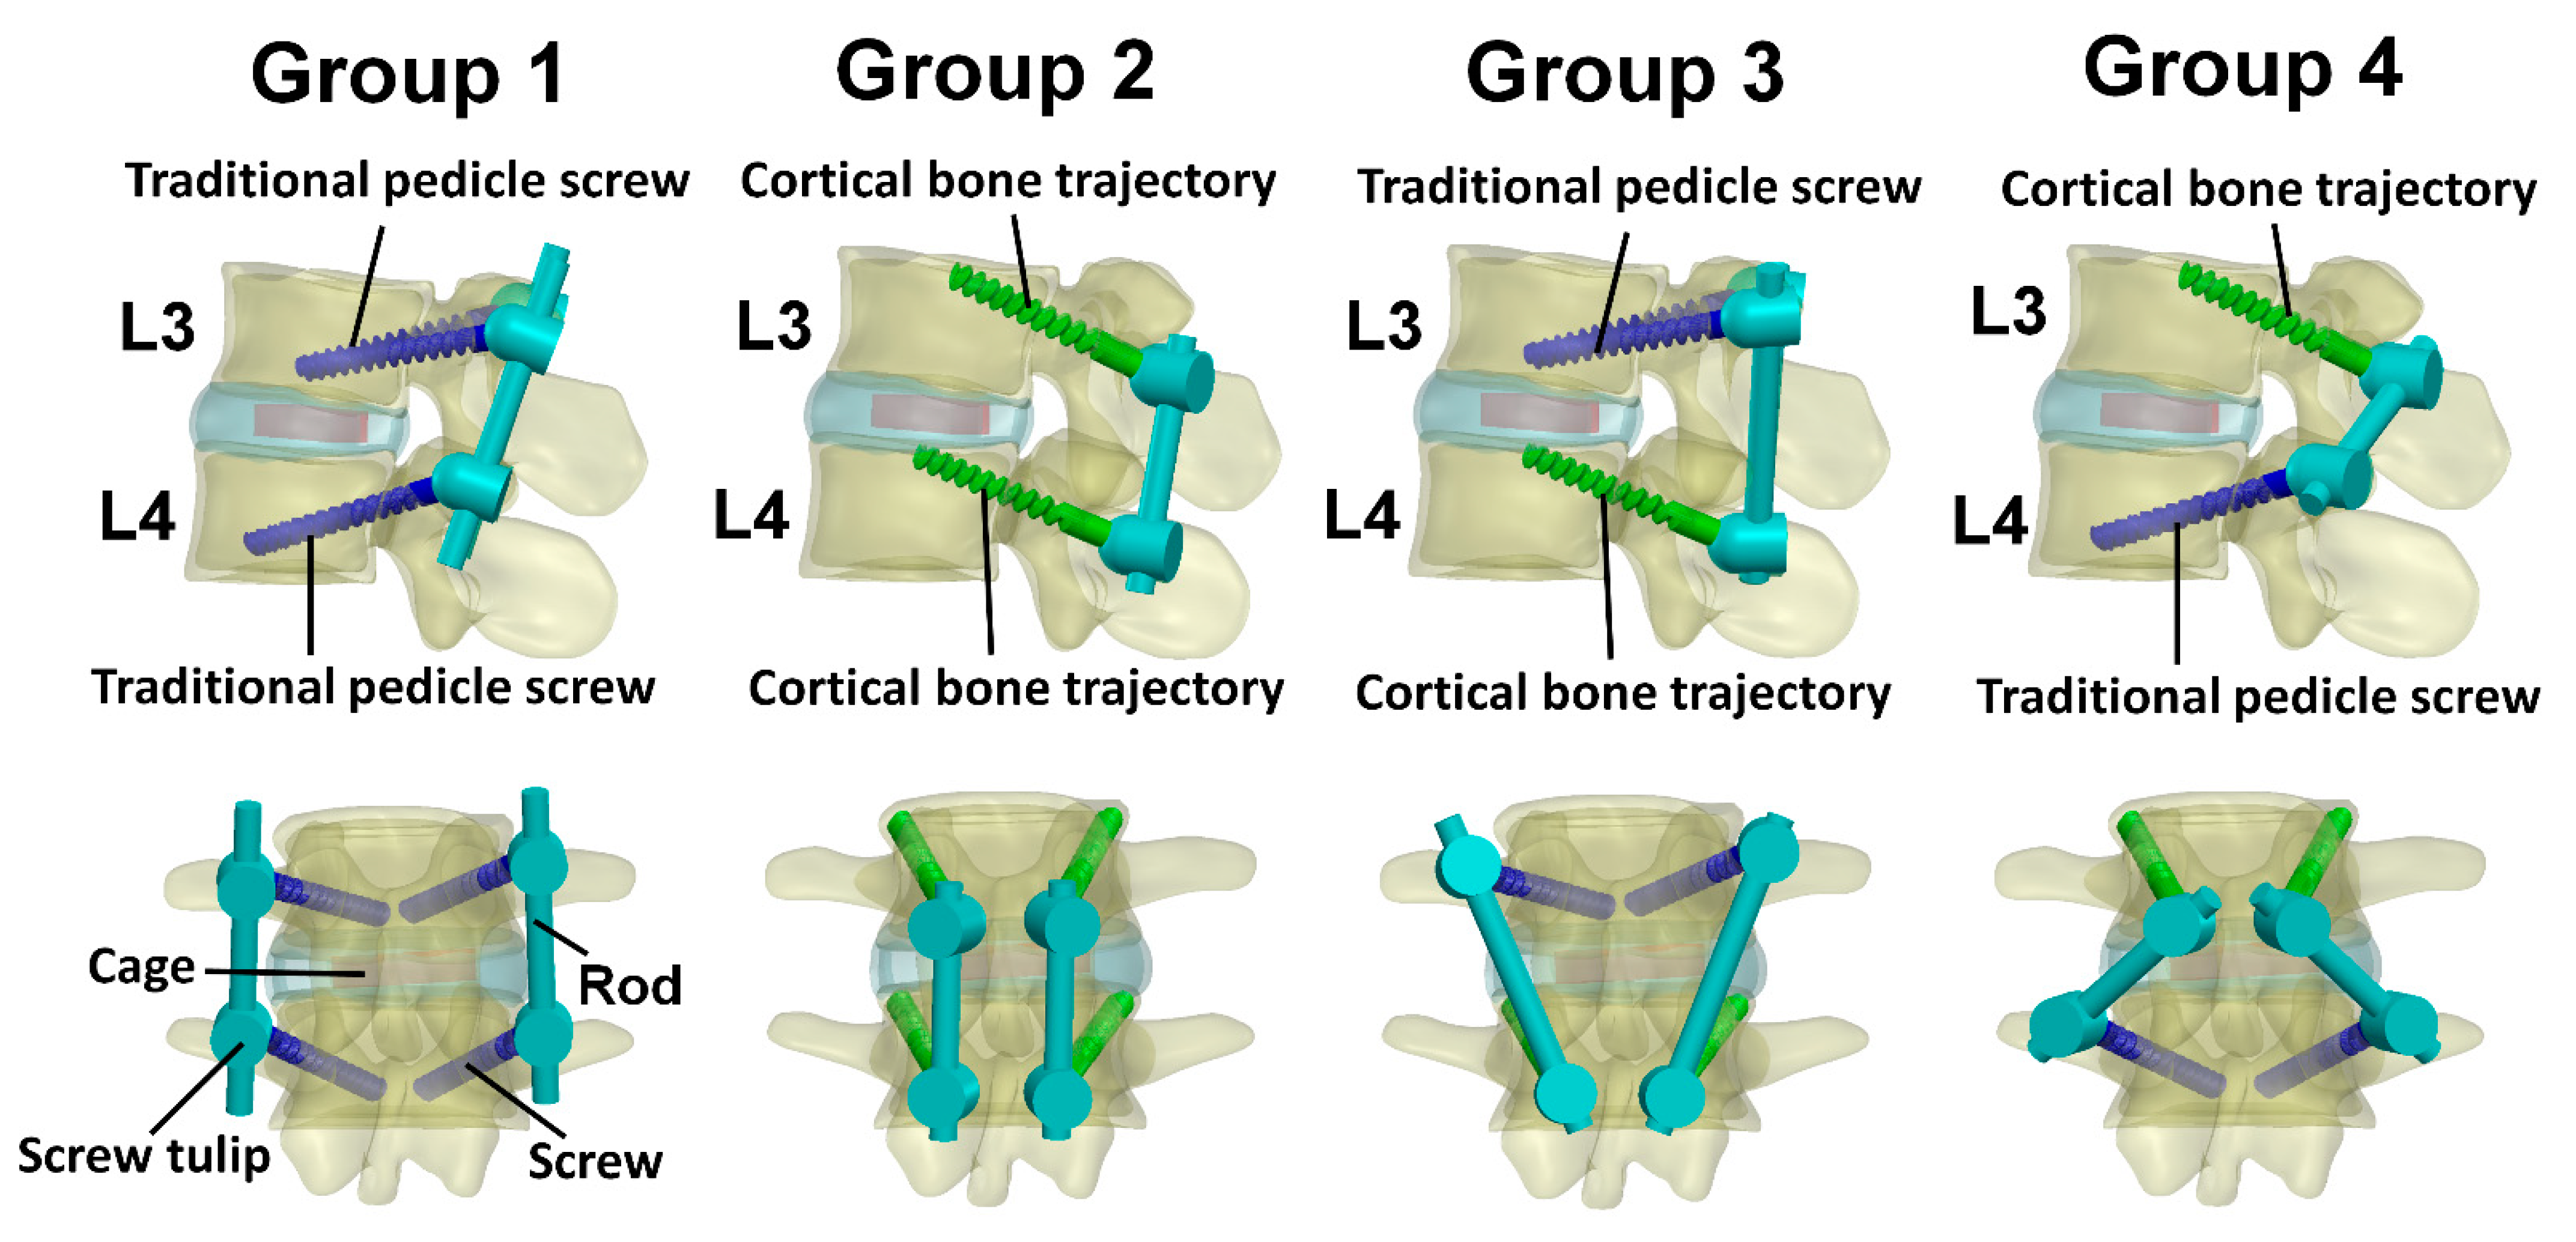 Applied Sciences | Free Full-Text | Biomechanical Evaluation of Cortical  Bone Trajectory Fixation with Traditional Pedicle Screw in the Lumbar  Spine: A Finite Element Study